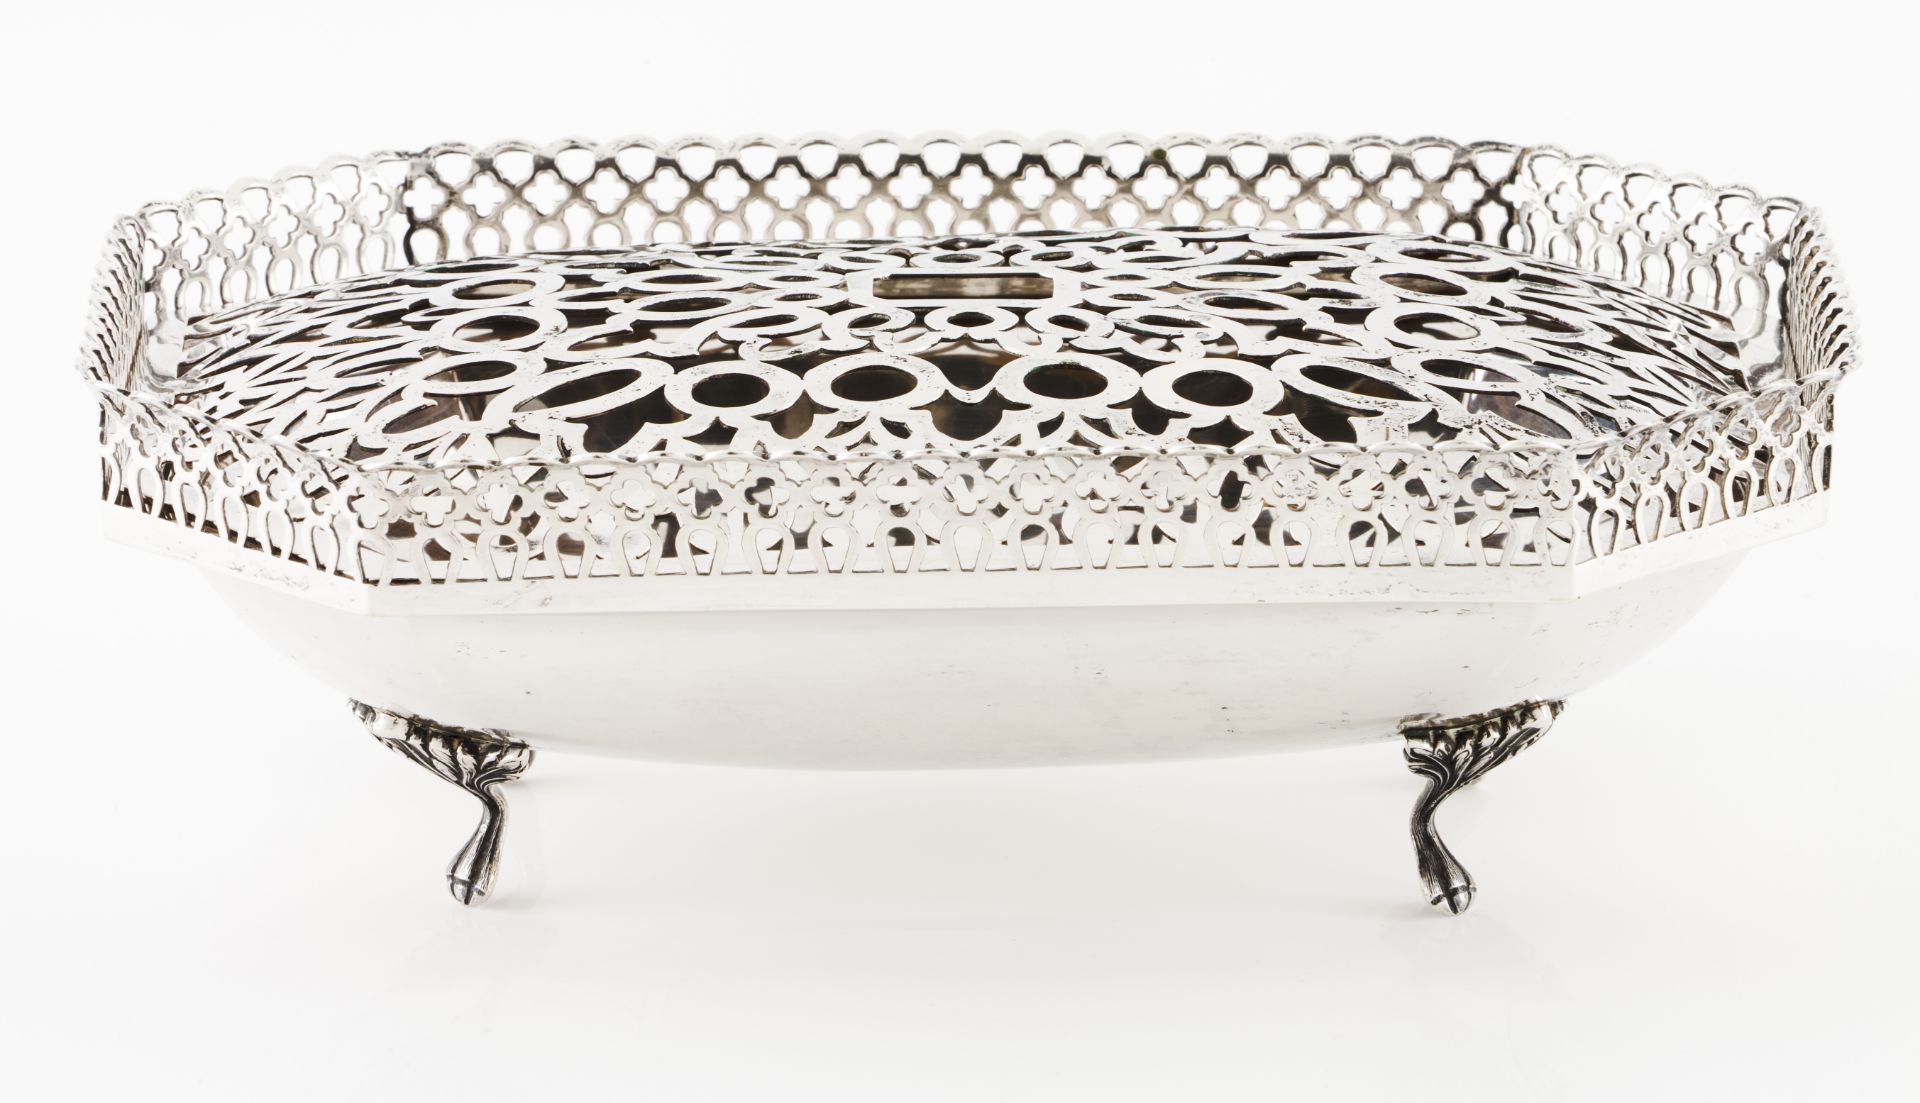 A flower bowl / plateauPortuguese silver Rectangular bowl of cut corners and pierced geometric